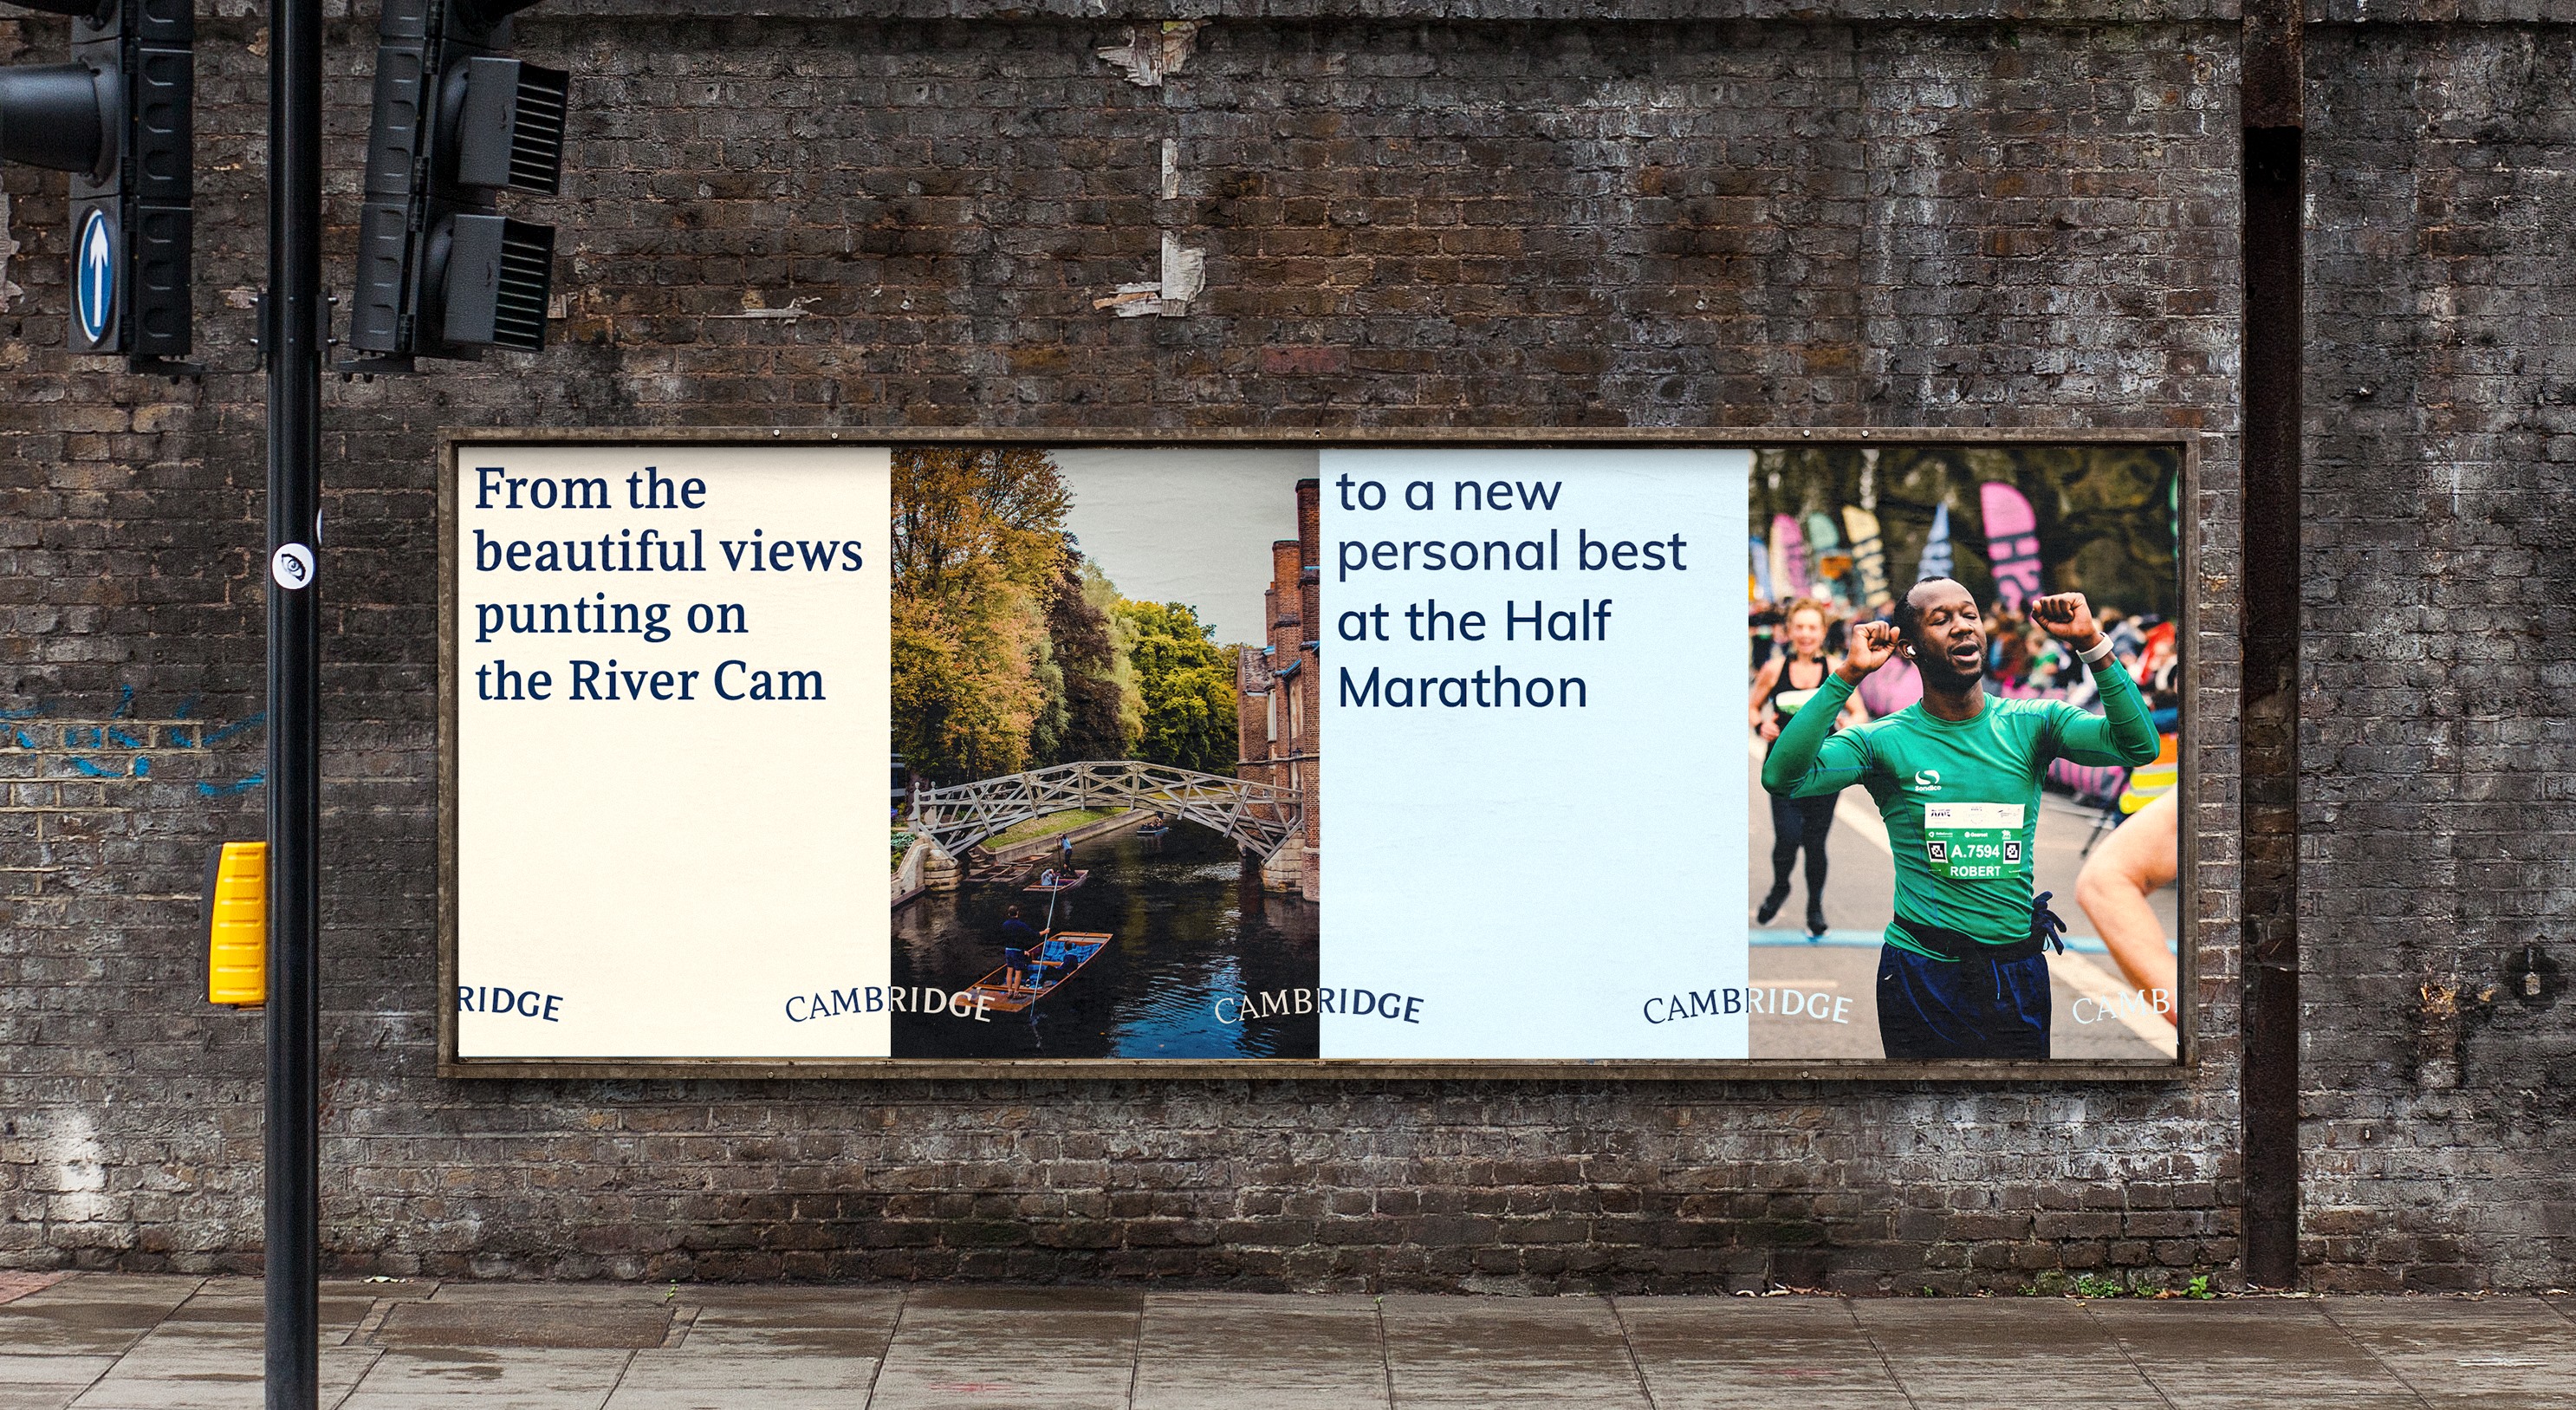 A billboard poster series for Cambridge showing bright colours and beautiful photography of Cambridge.